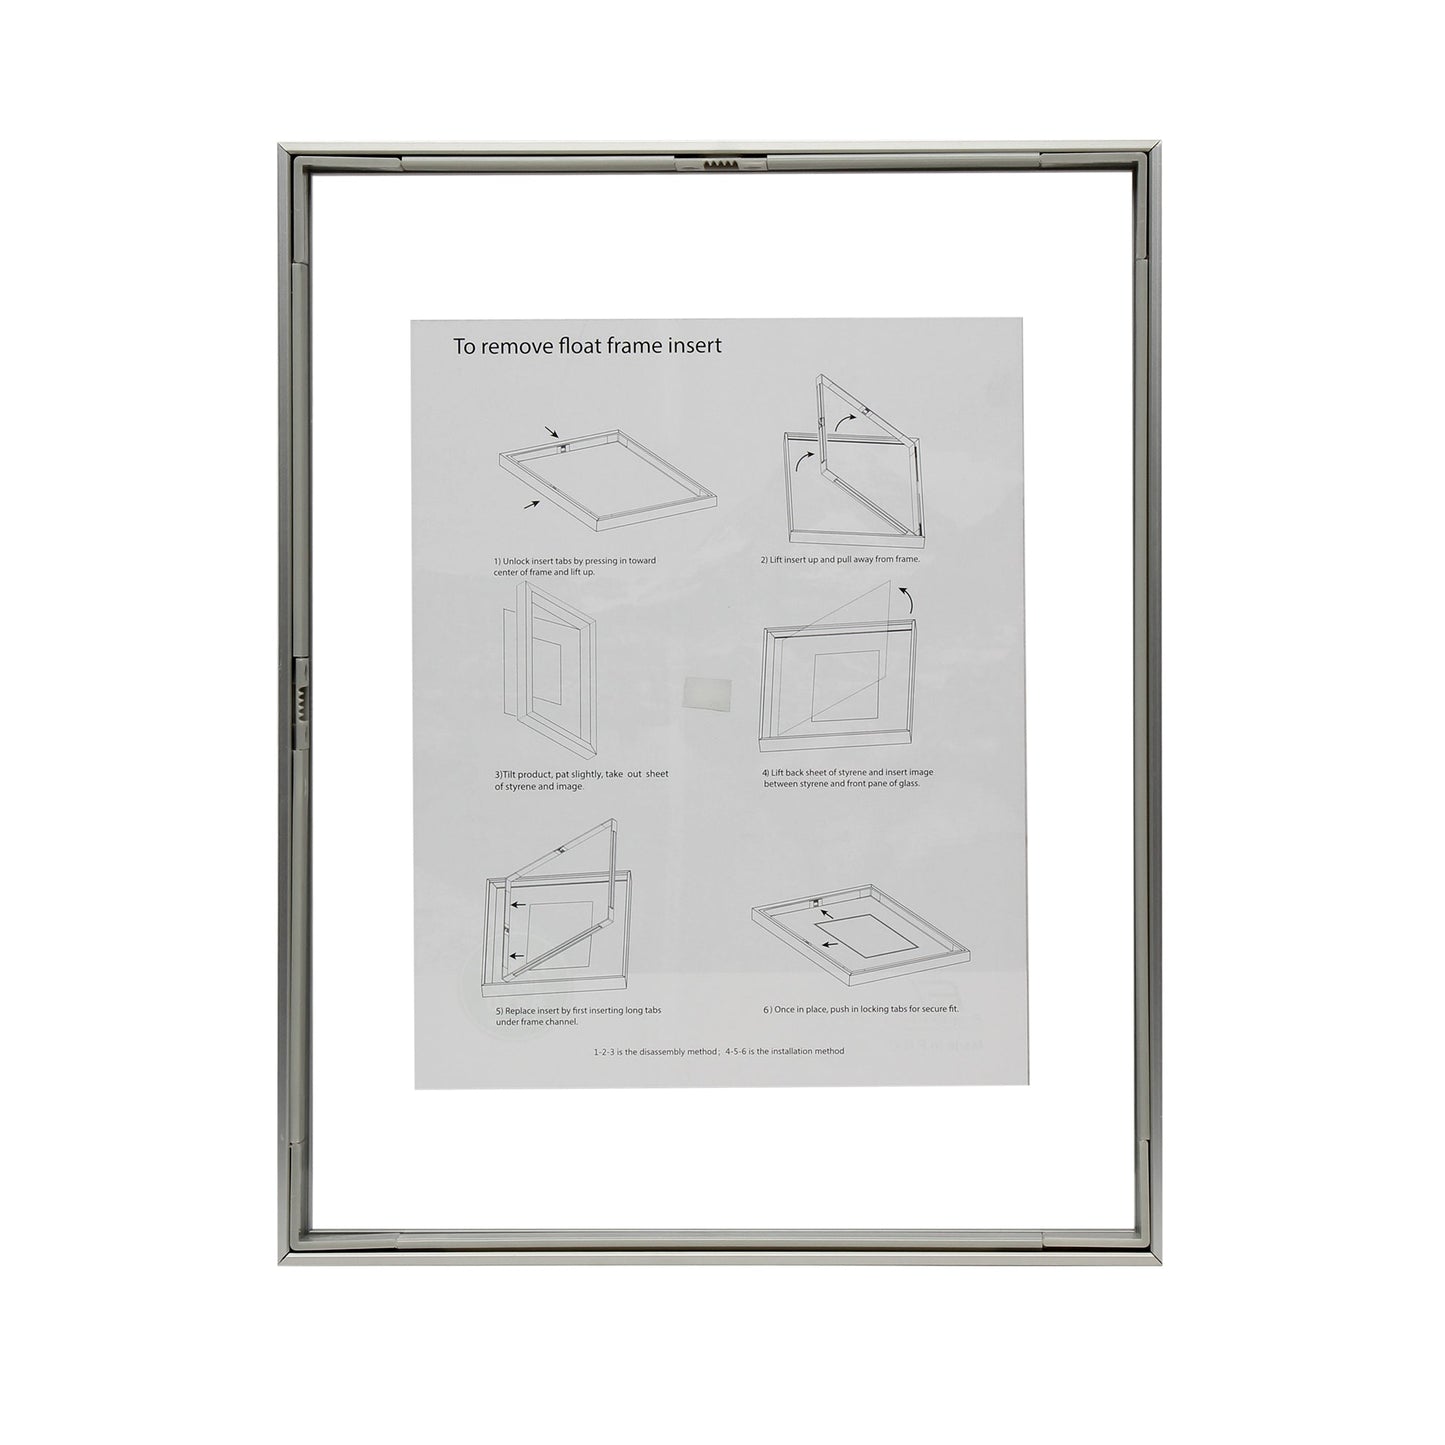 11" x 14" Deluxe Silver Aluminum Contemporary Floating Picture Frame with Tempered Glass